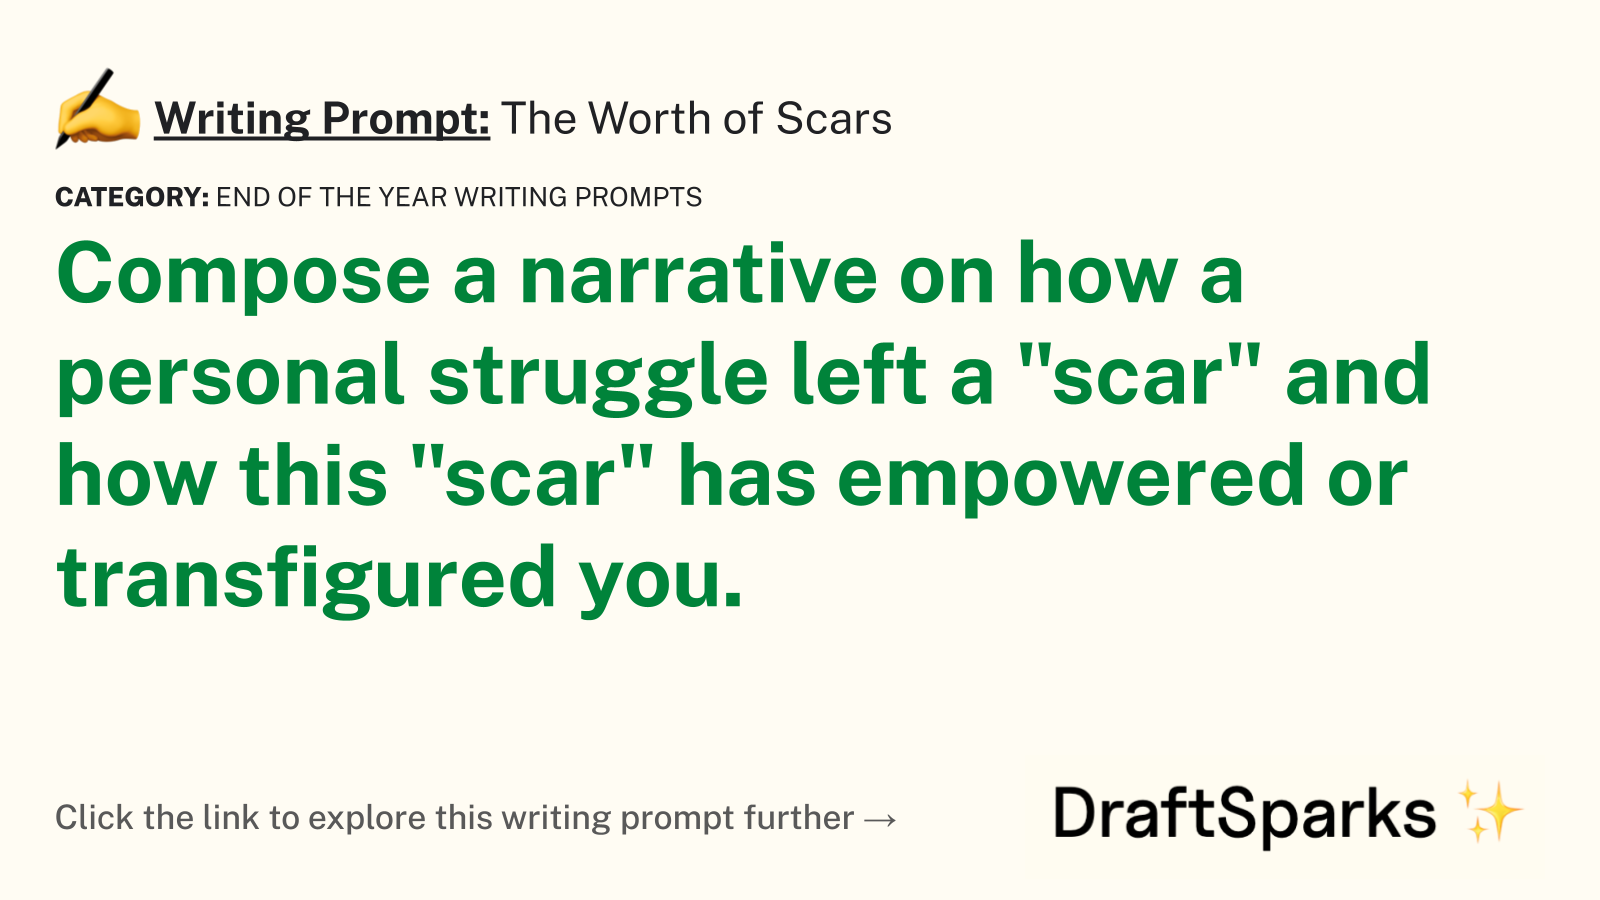 The Worth of Scars